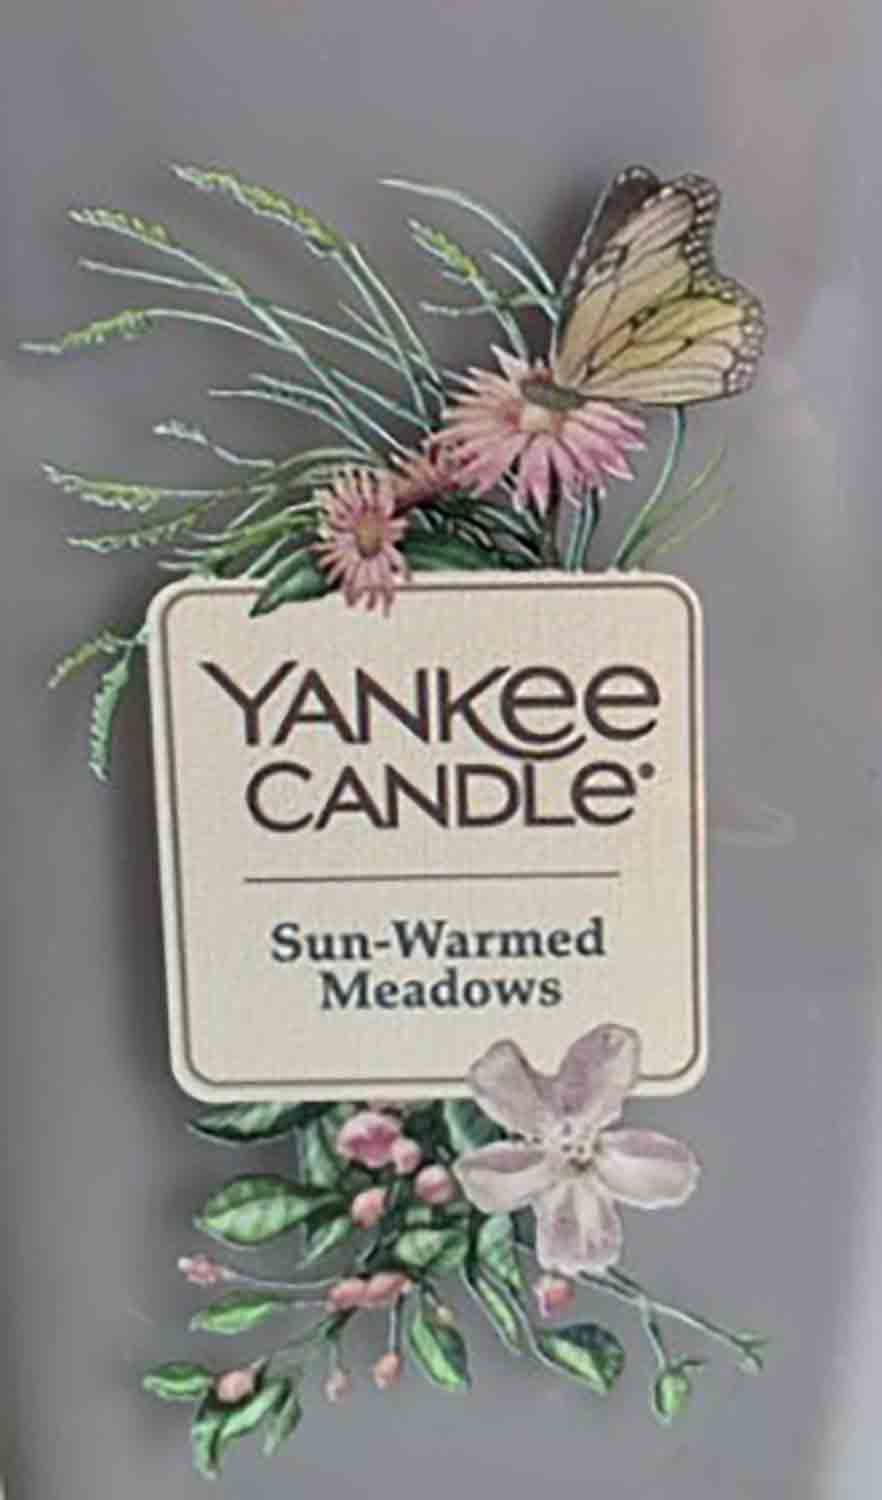 Yankee Candle Sun-Warmed Meadows USA 22 g - Crumble vosk